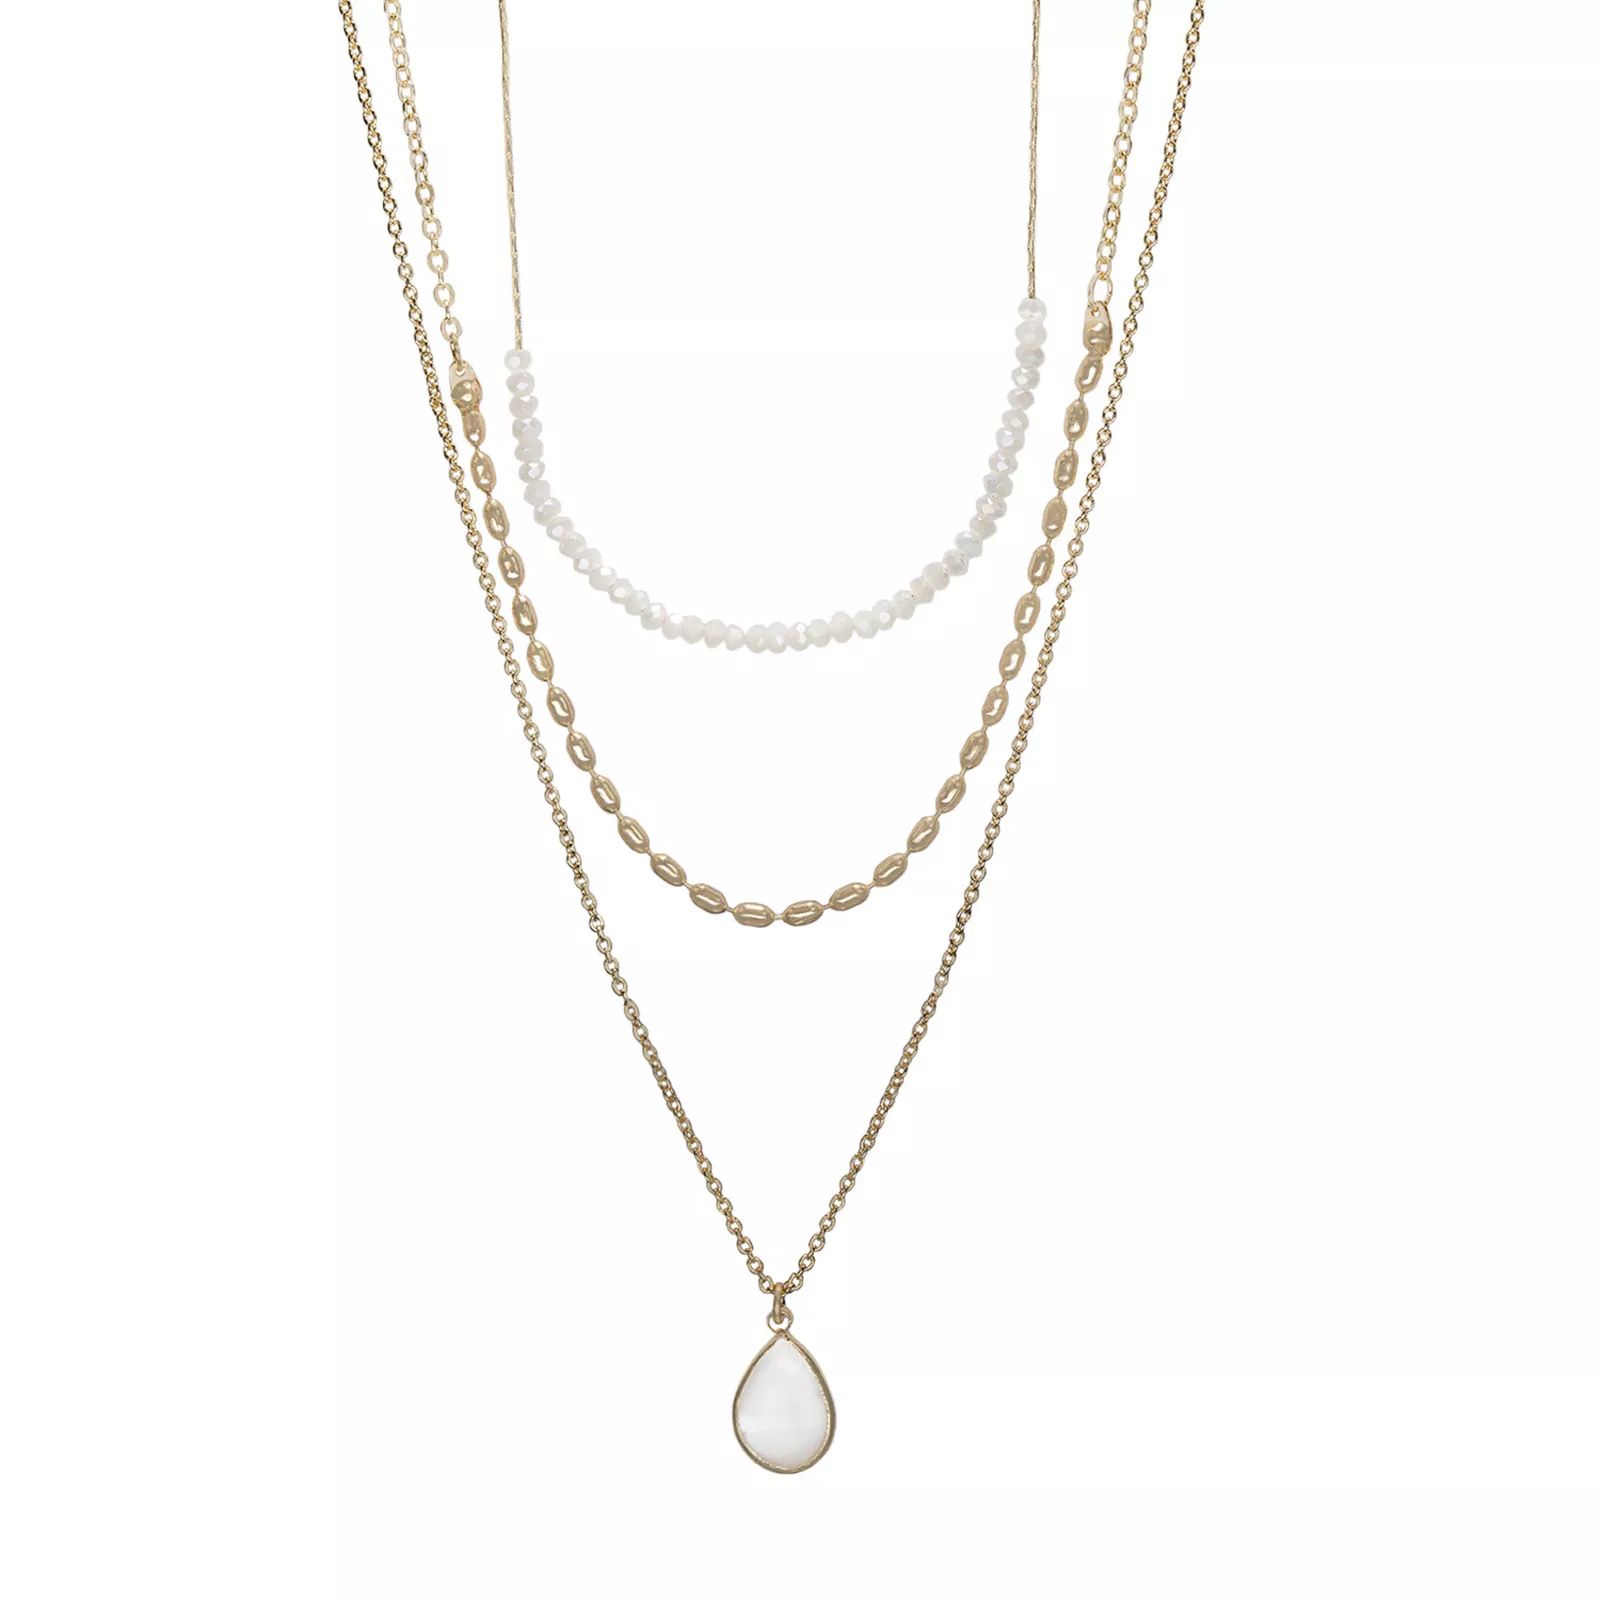 LC Lauren Conrad Layered Chain and Beads Pendant Necklace, Women's, White | Kohl's